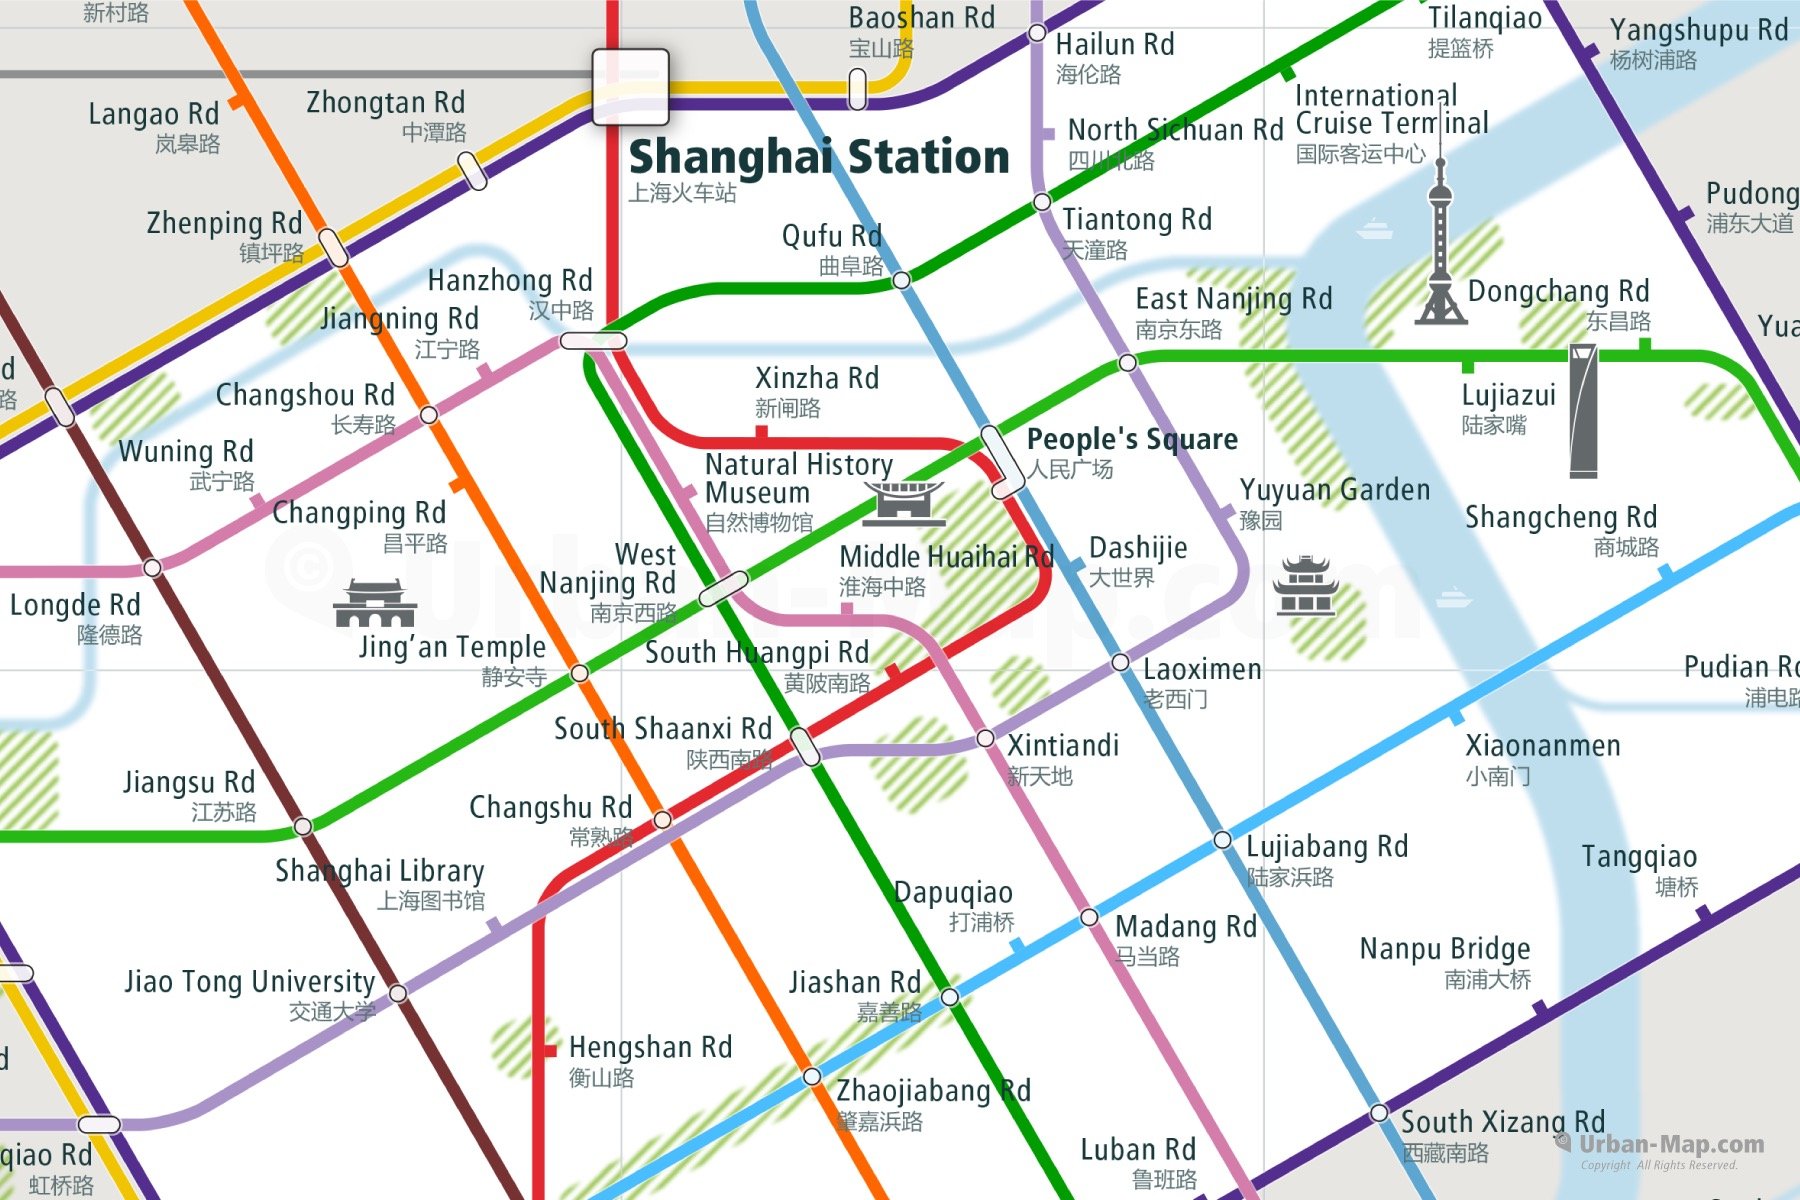 Shanghai City Rail Map shows the train and public transportation routes of Metro - Close-Up